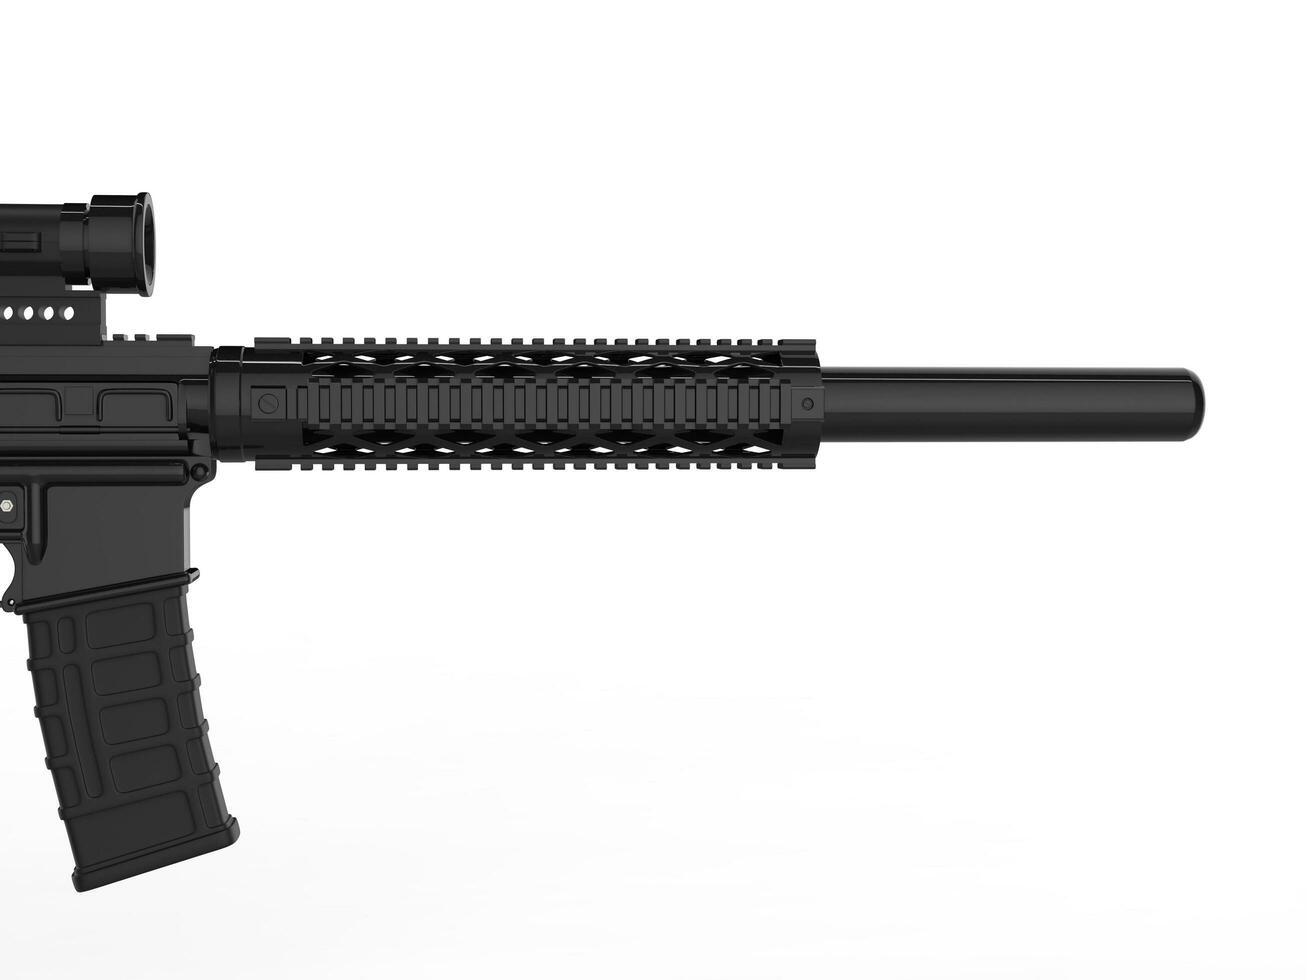 Modern army assault rifle with silencer - closeup on the barrel - side view photo